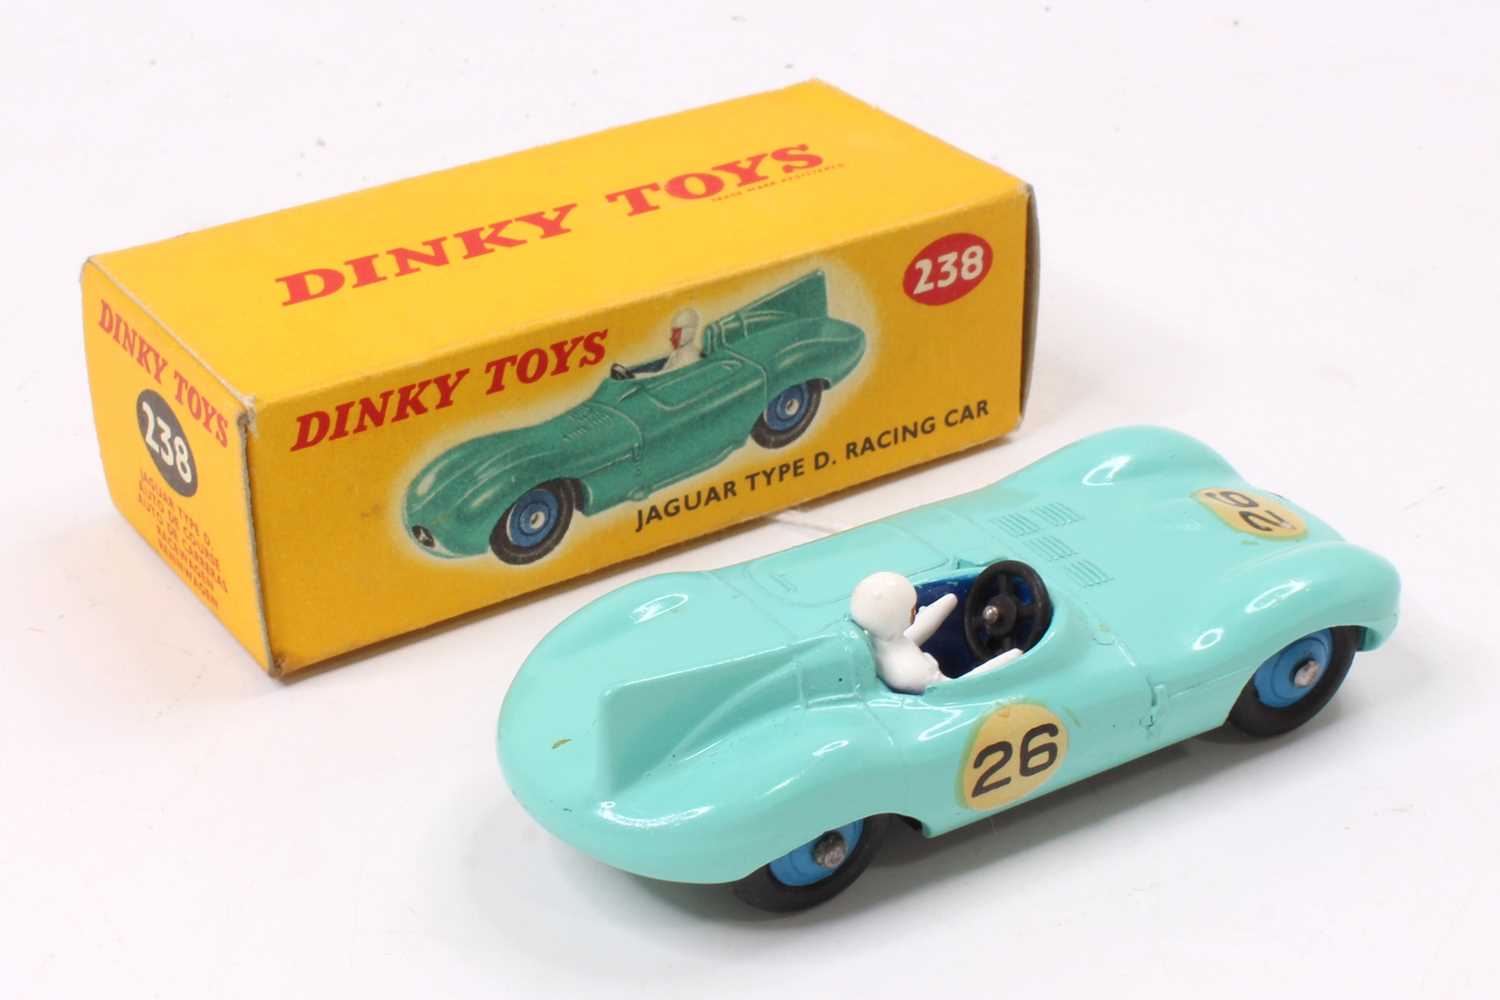 Dinky Toys, 238 Jaguar Type D racing car in turquoise with white driver, blue interior and blue - Image 2 of 2